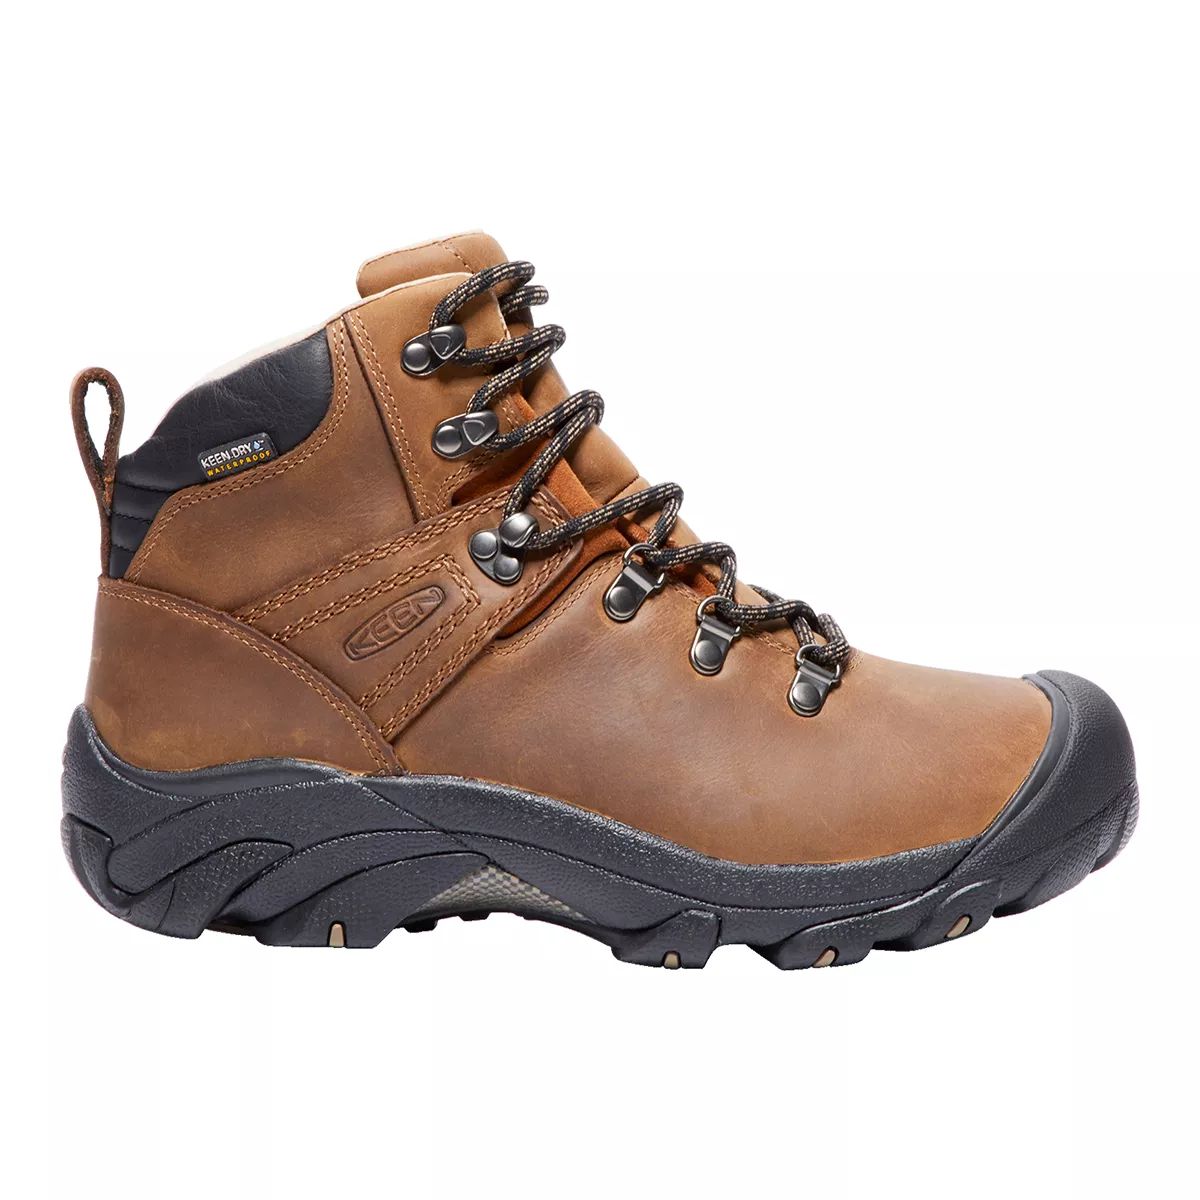 Image of Keen Women's Pyrenees Waterproof Breathable Hiking Boots